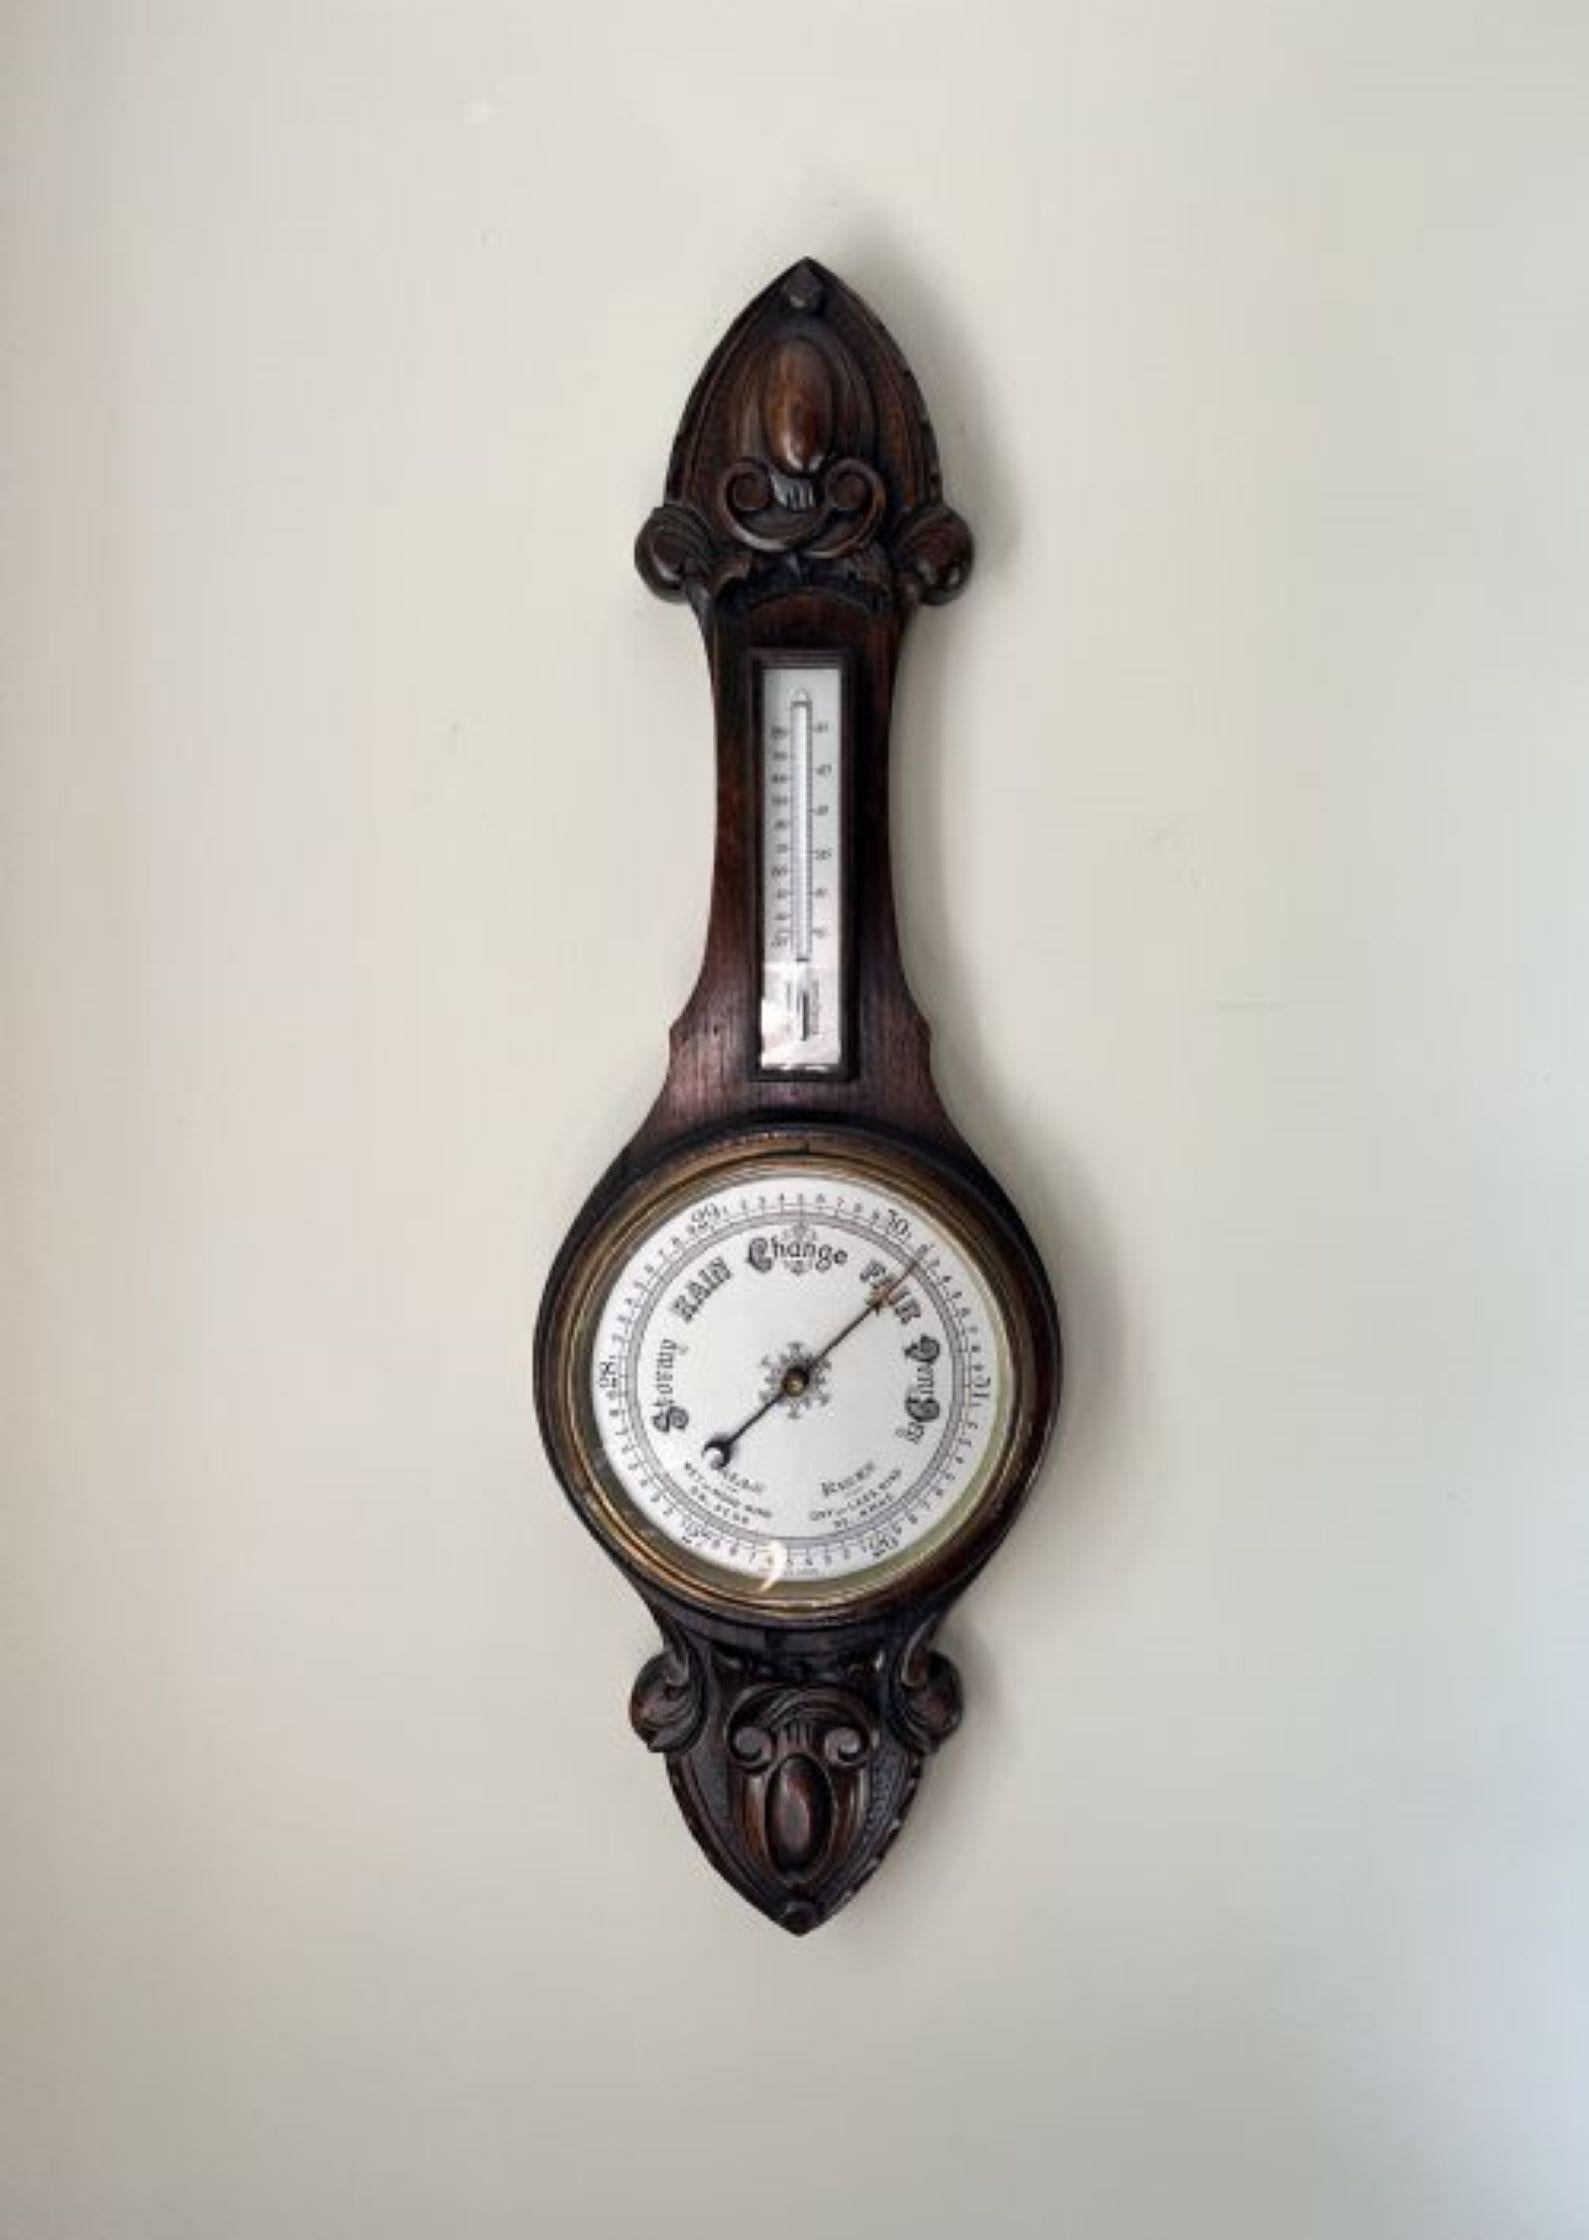 Quality antique Edwardian carved oak aneroid barometer having a quality antique Edwardian carved oak barometer with a quality carved oak case, the original brass bezel, porcelain dial and thermometer. 